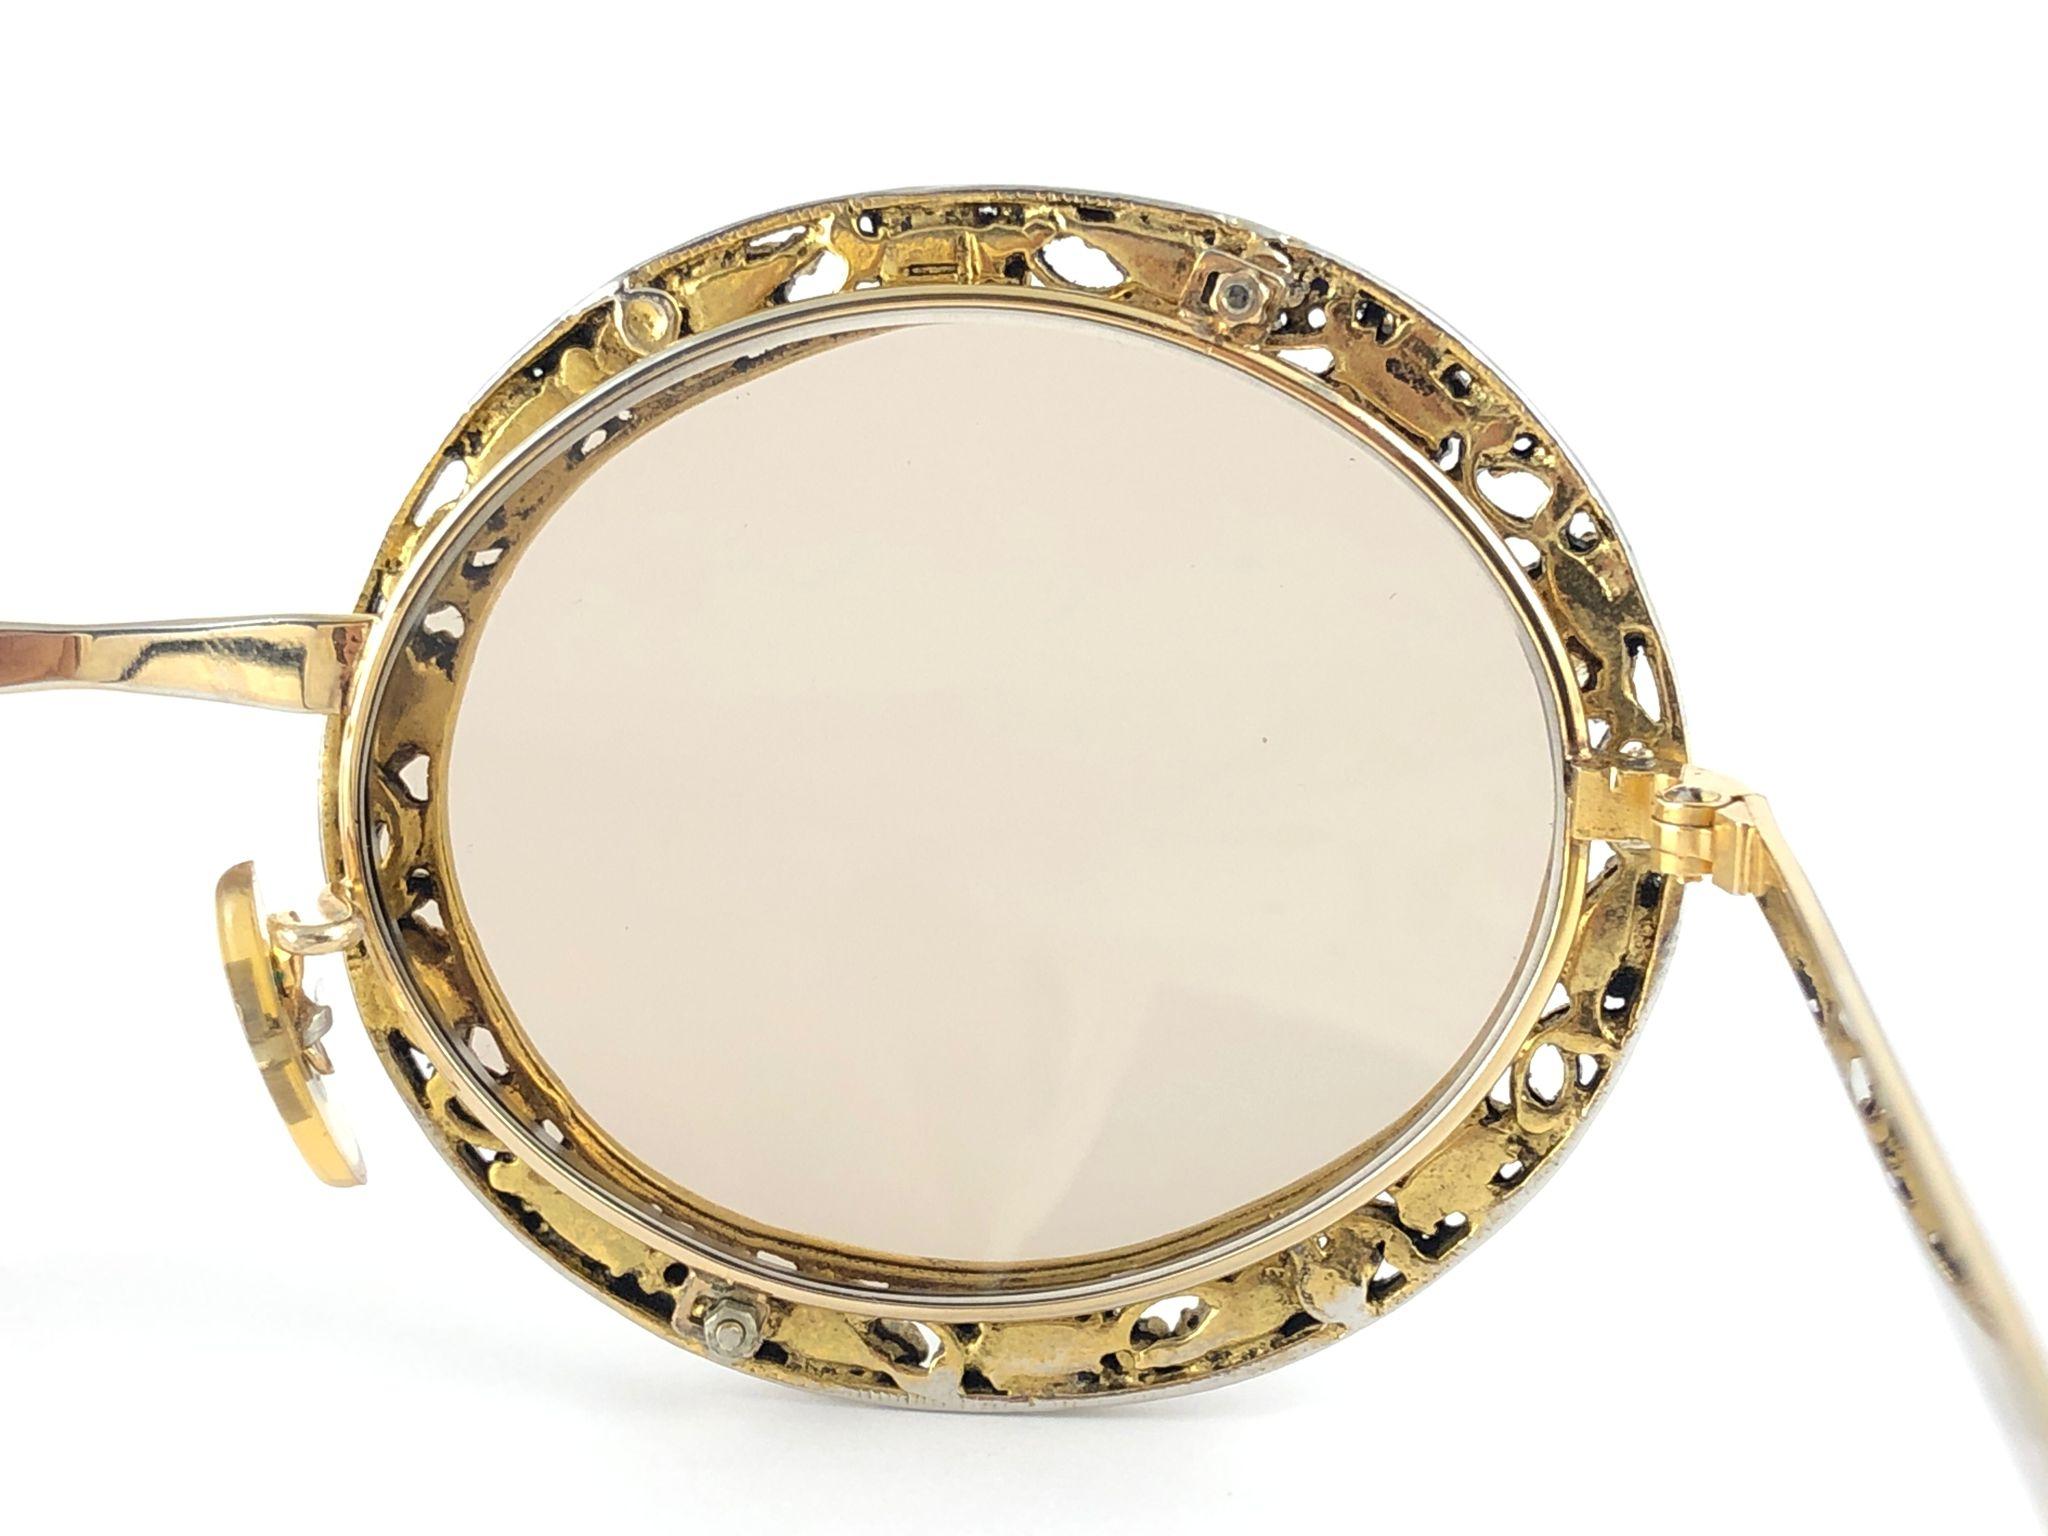 Ultra Rare 1960 Tura Jewelled Opal Accented Frame Archive Dior Sunglasses For Sale 2